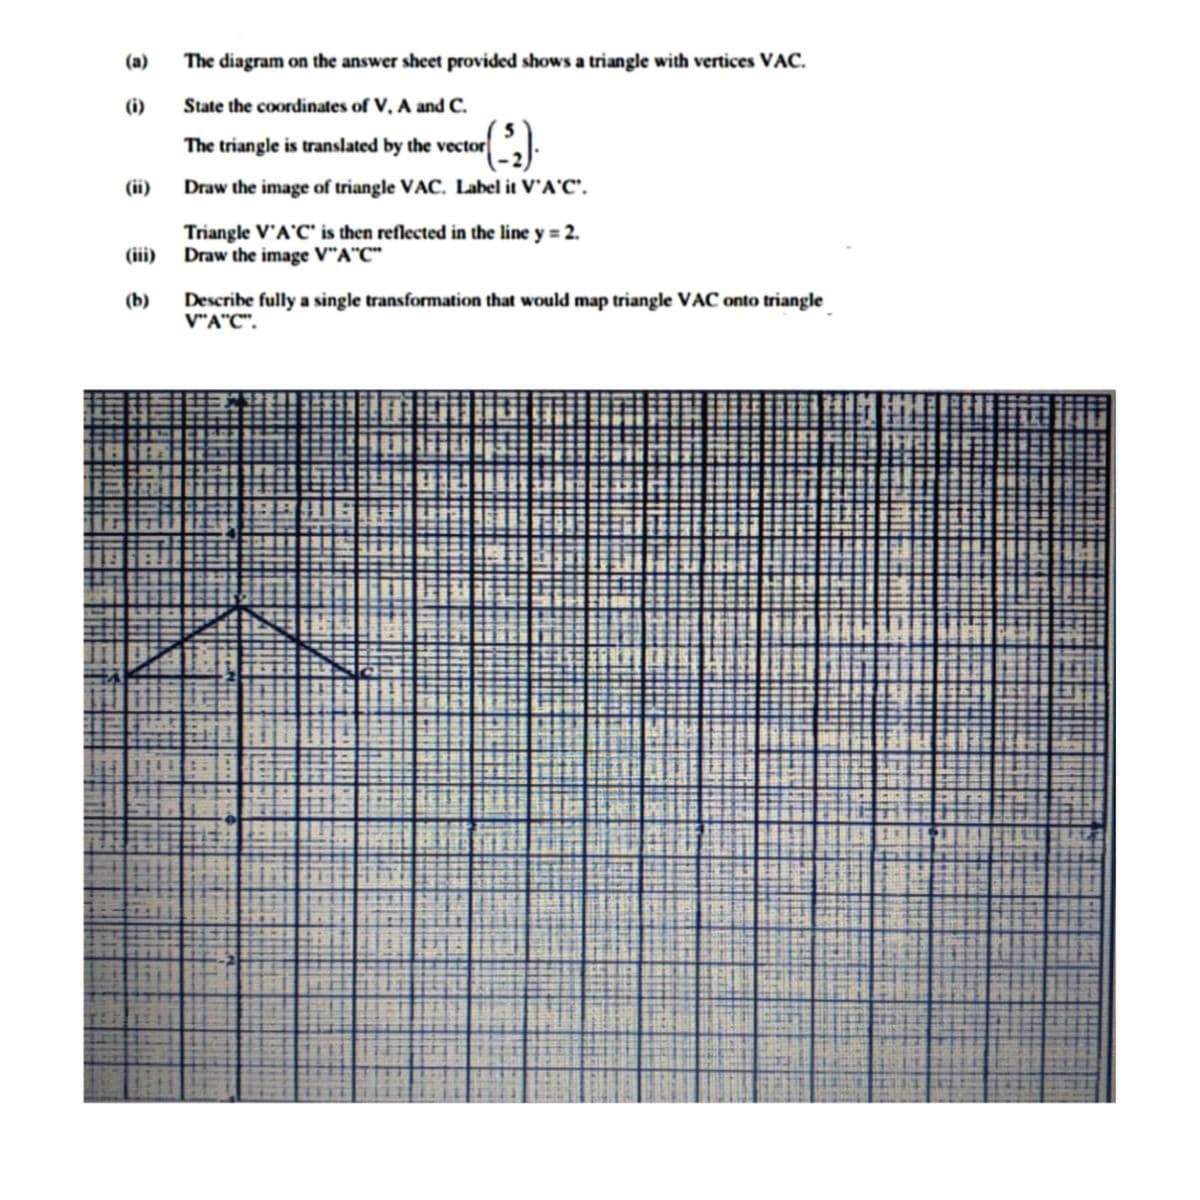 (a)
The diagram on the answer sheet provided shows a triangle with vertices VAC.
(i)
State the coordinates of V, A and C.
The triangle is translated by the vector
(ii)
Draw the image of triangle VAC. Label it V'A'C'.
Triangle V'A'C" is then reflected in the line y = 2.
(iii) Draw the image V"A"C"
Describe fully a single transformation that would map triangle VAC onto triangle
V"A"C".
(b)
